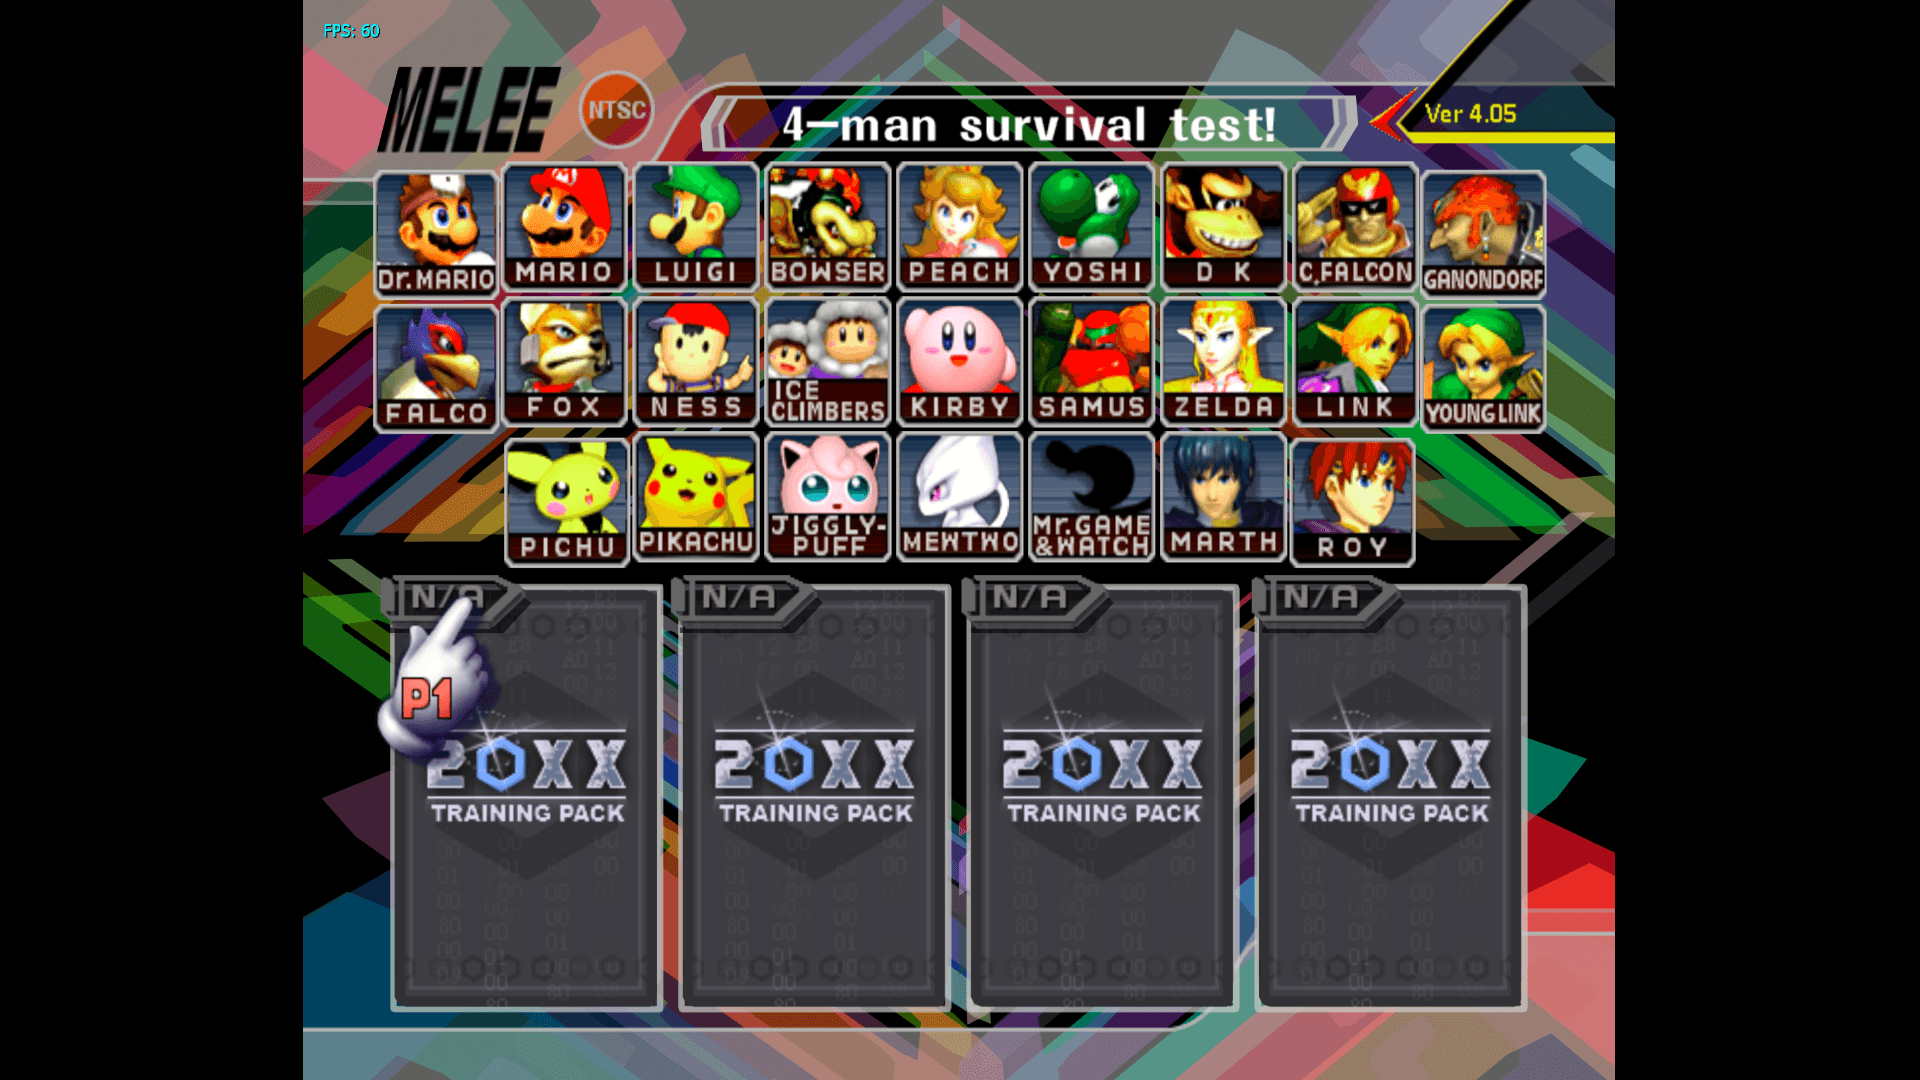 Super Smash Bros. Melee character select screen that has been heavily modified to be more colorful.